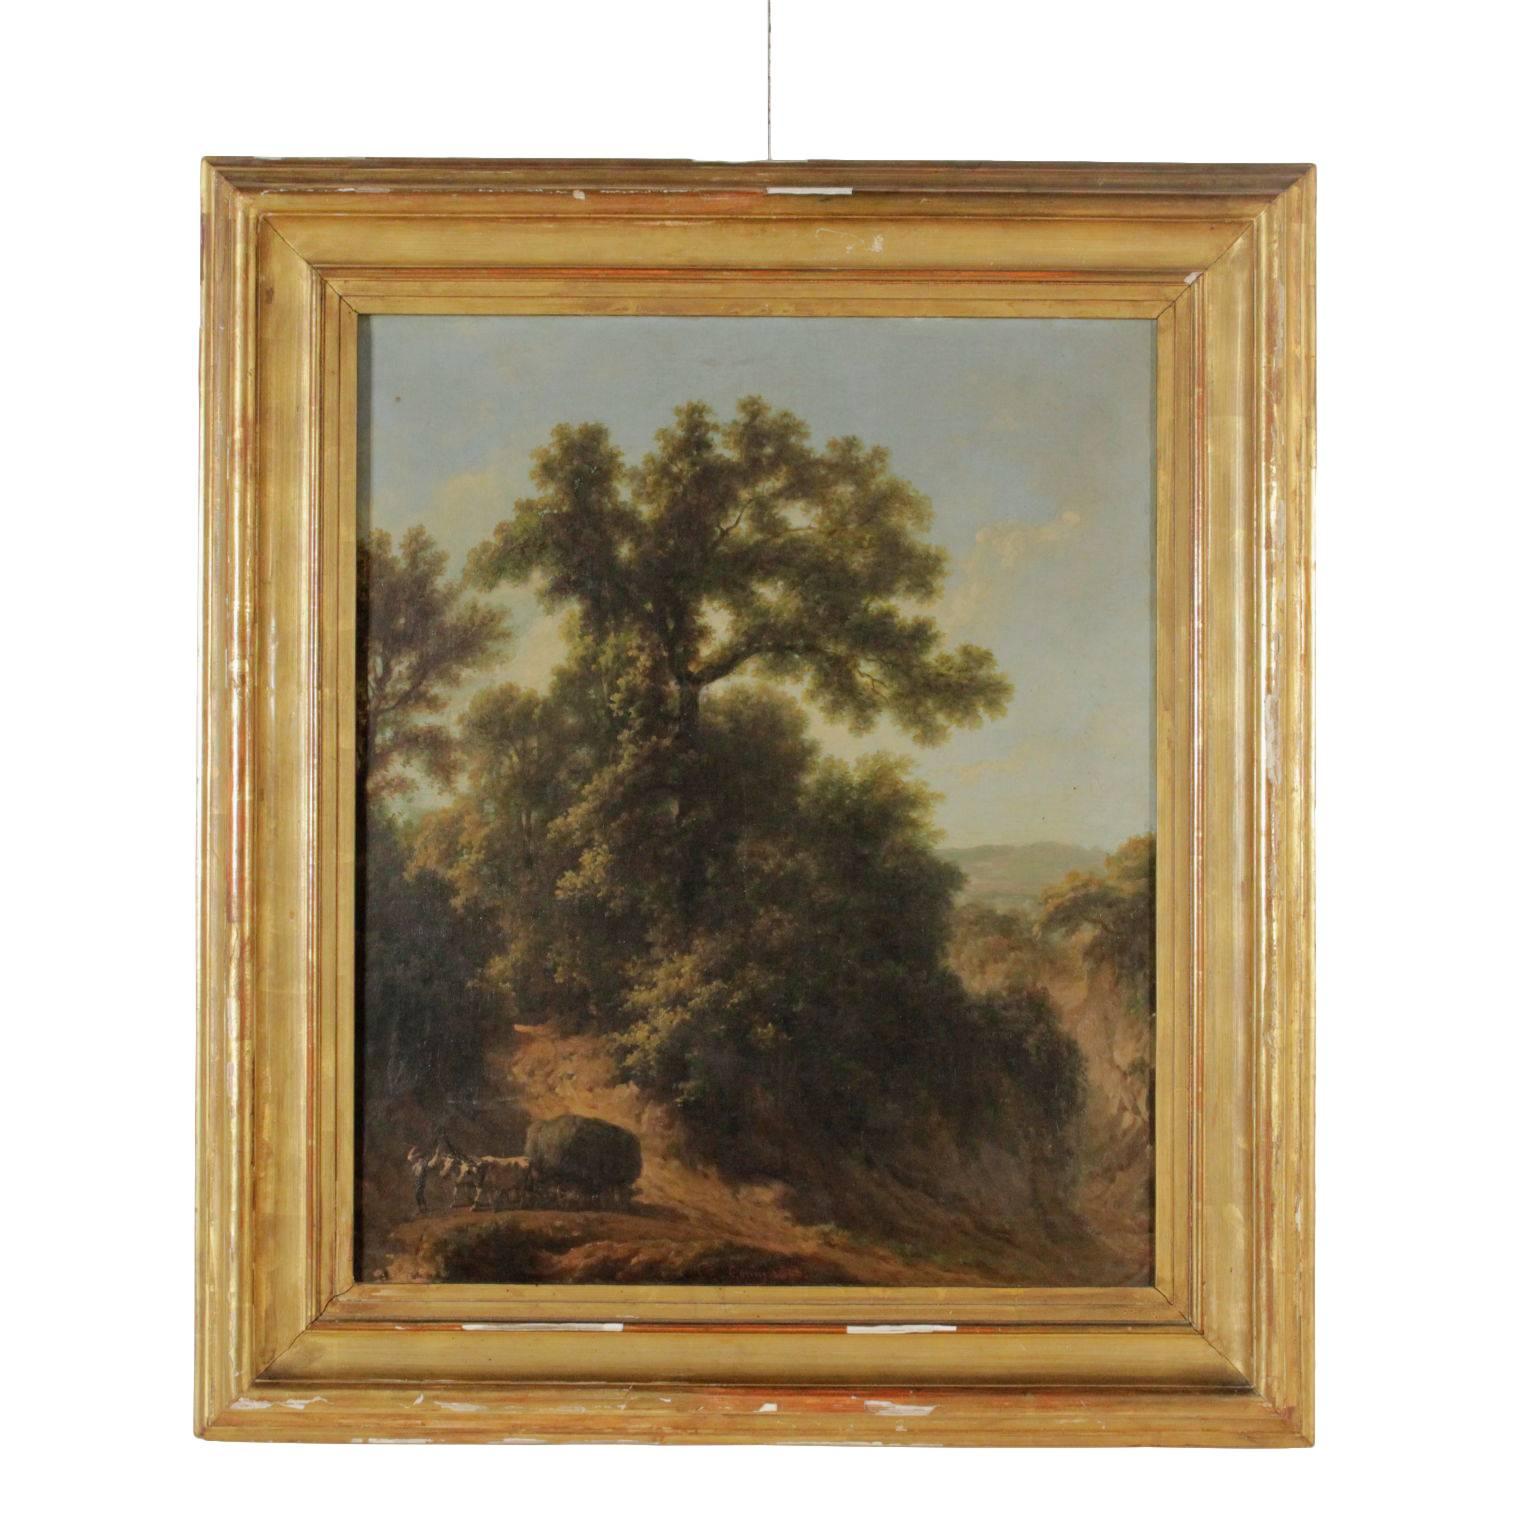 Oil on canvas painted by Francesco Gonin (1808-1889). Signature and date (1880) at the bottom centre. On the back, a remainder of some sealing wax and on the frame a participation label to a retrospective exhibition from the 1892 in Turin. It is